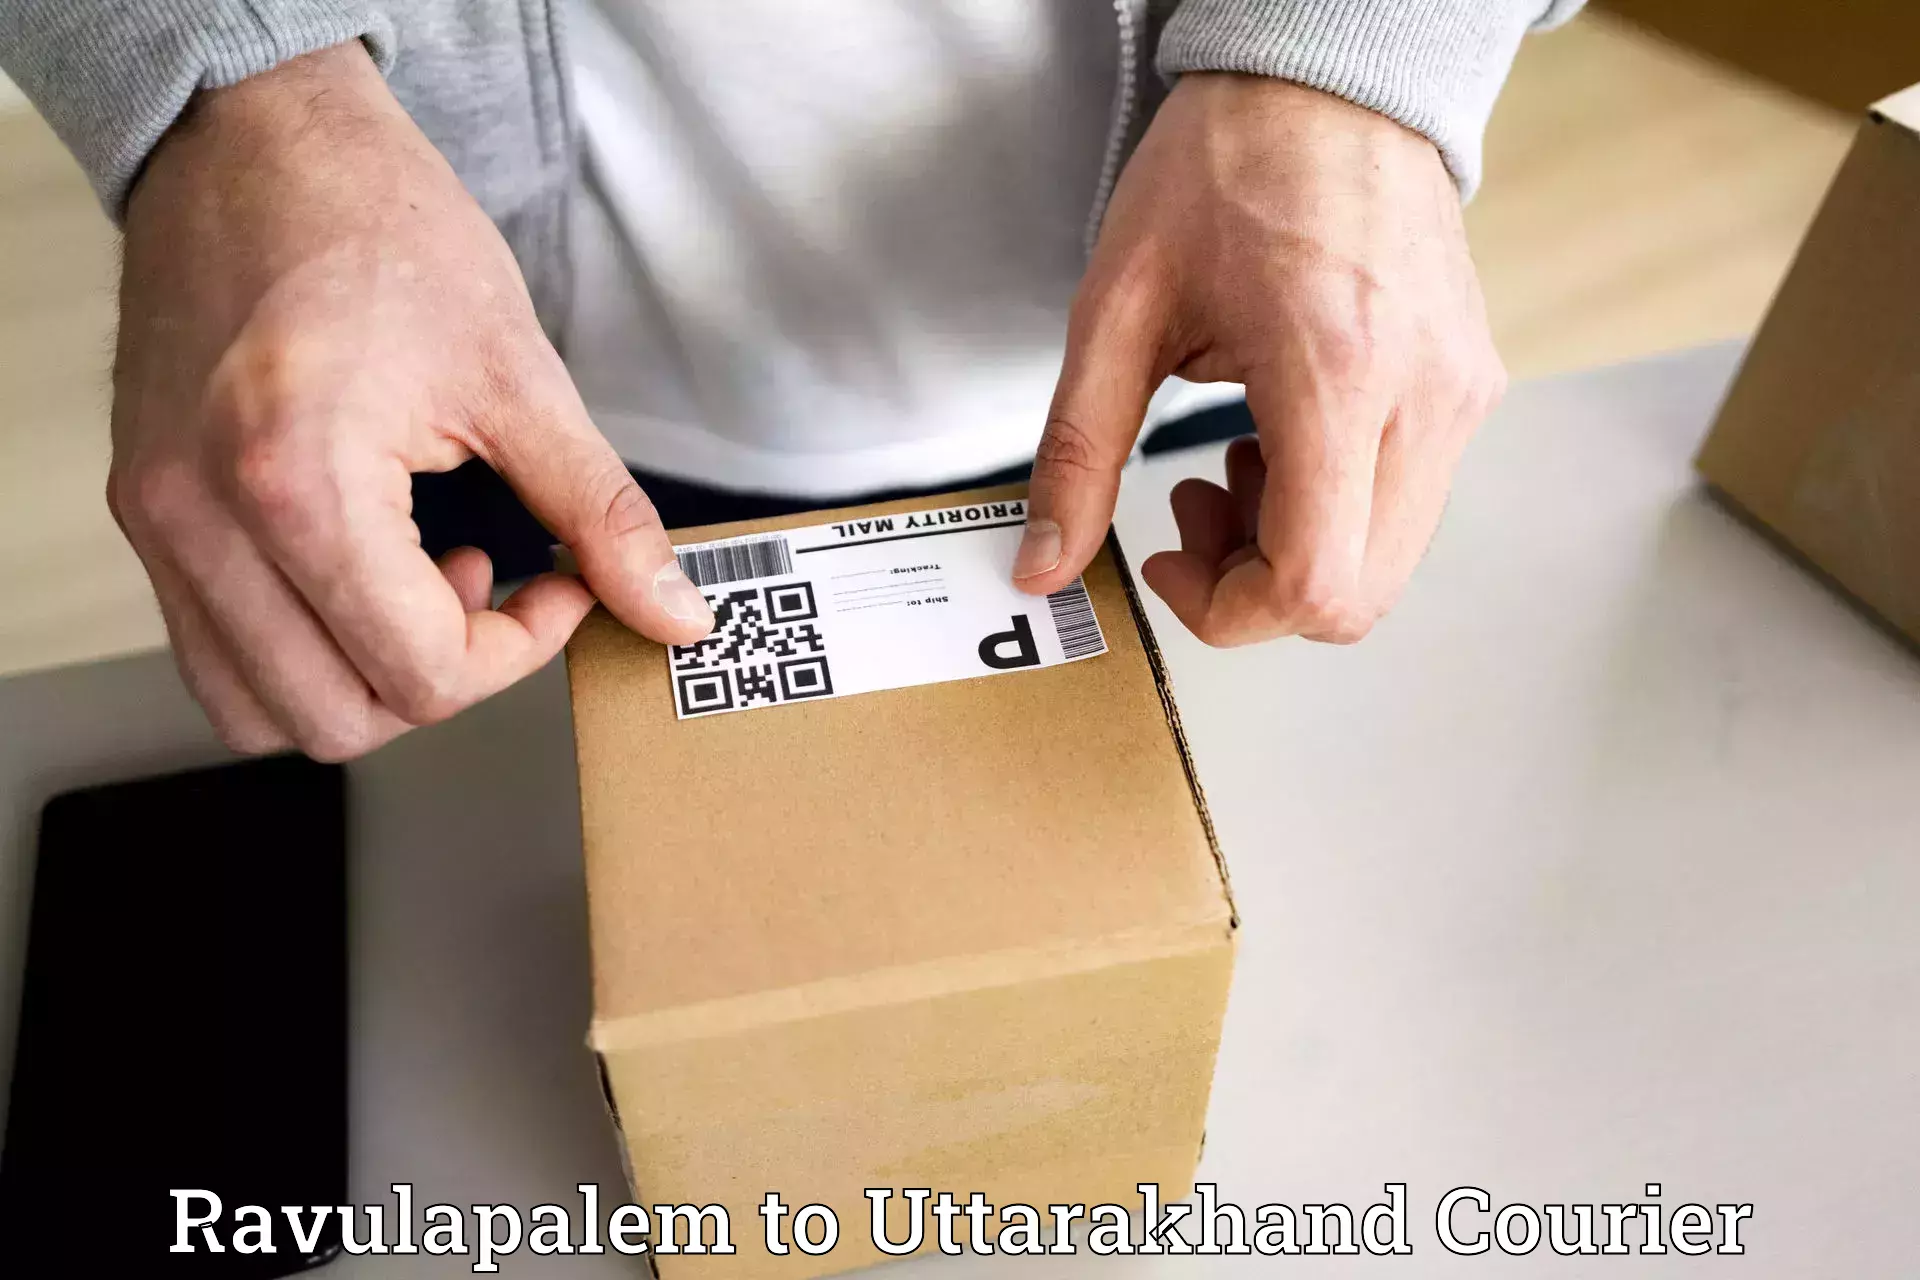 Online shipping calculator Ravulapalem to Rudrapur